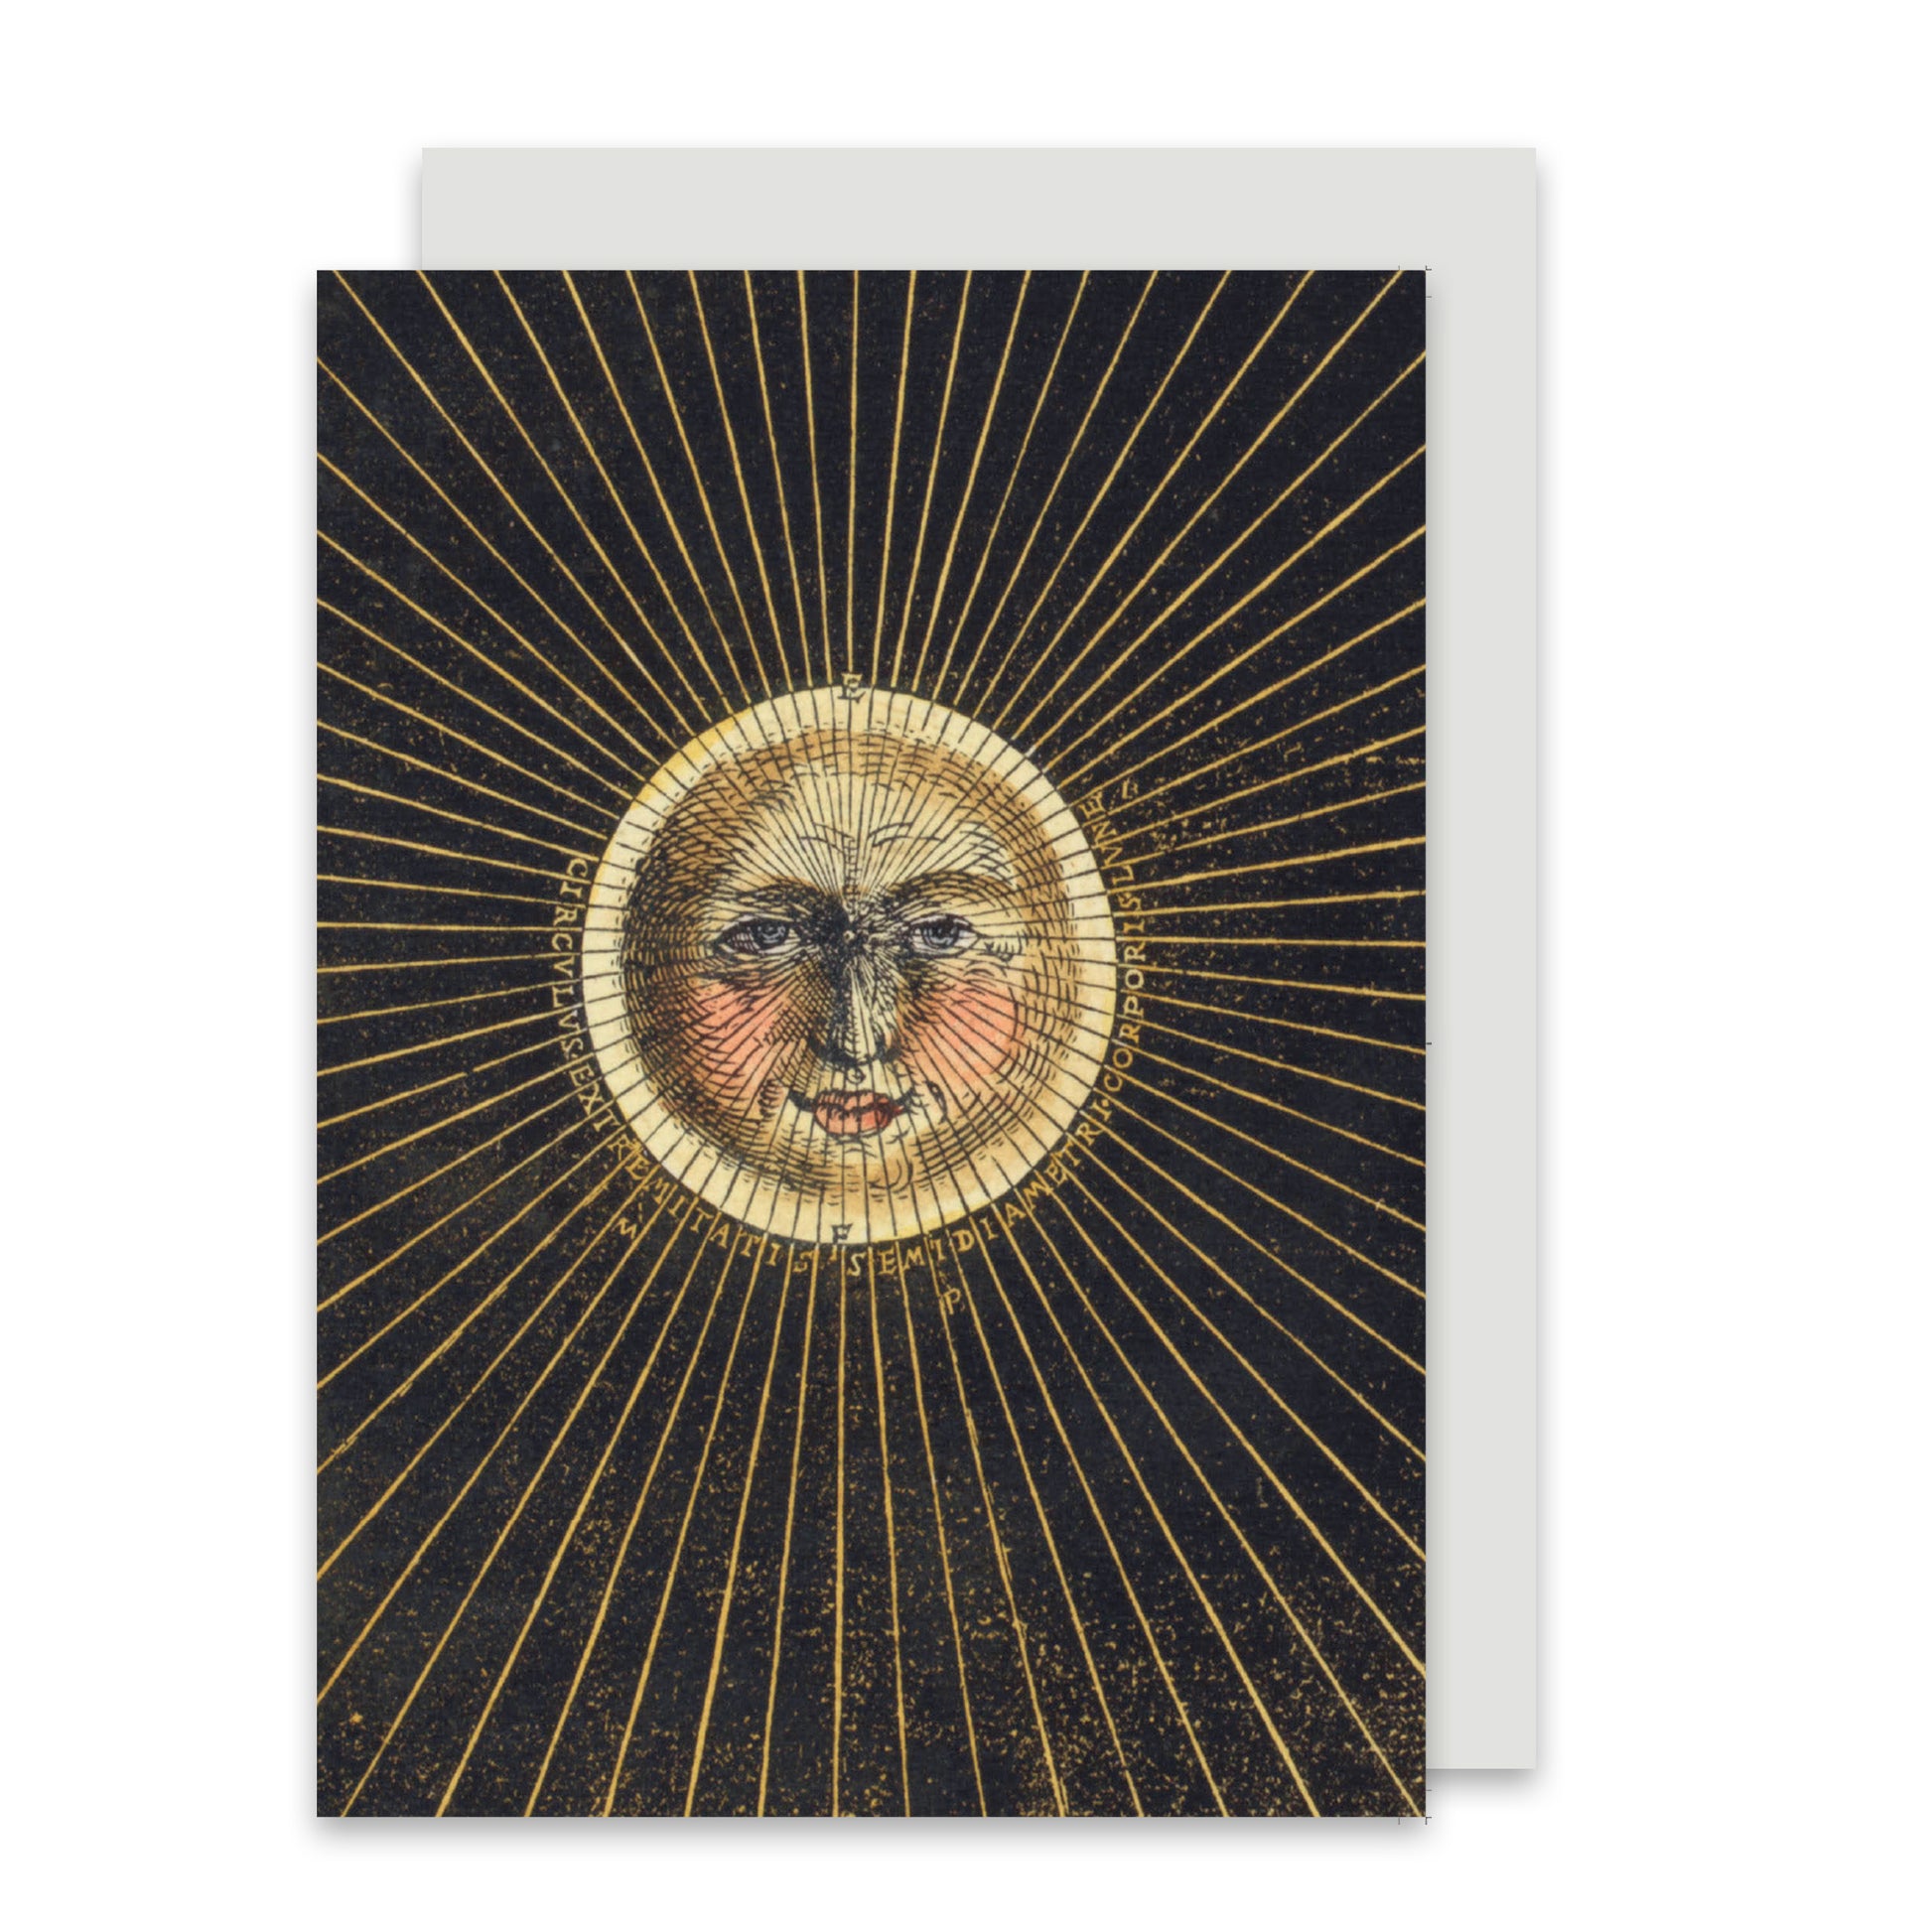 Standard greeting card with central sun with face design. Ray lines spreading out against a black background. Peter Apian. From the Renaissance art collection of the Fitzwilliam Museum.